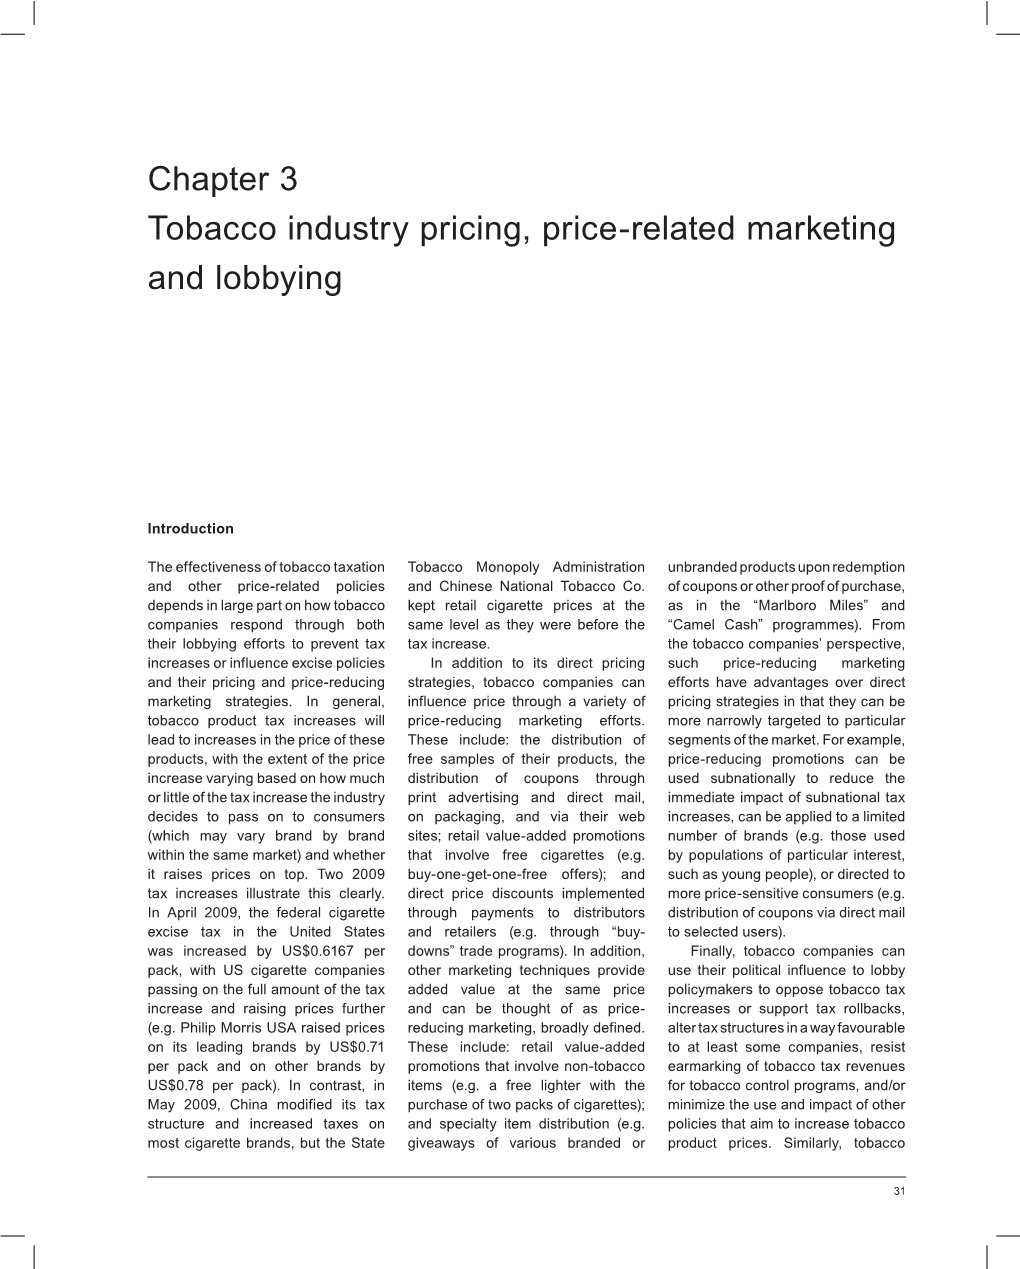 Chapter 3 Tobacco Industry Pricing, Price-Related Marketing and Lobbying